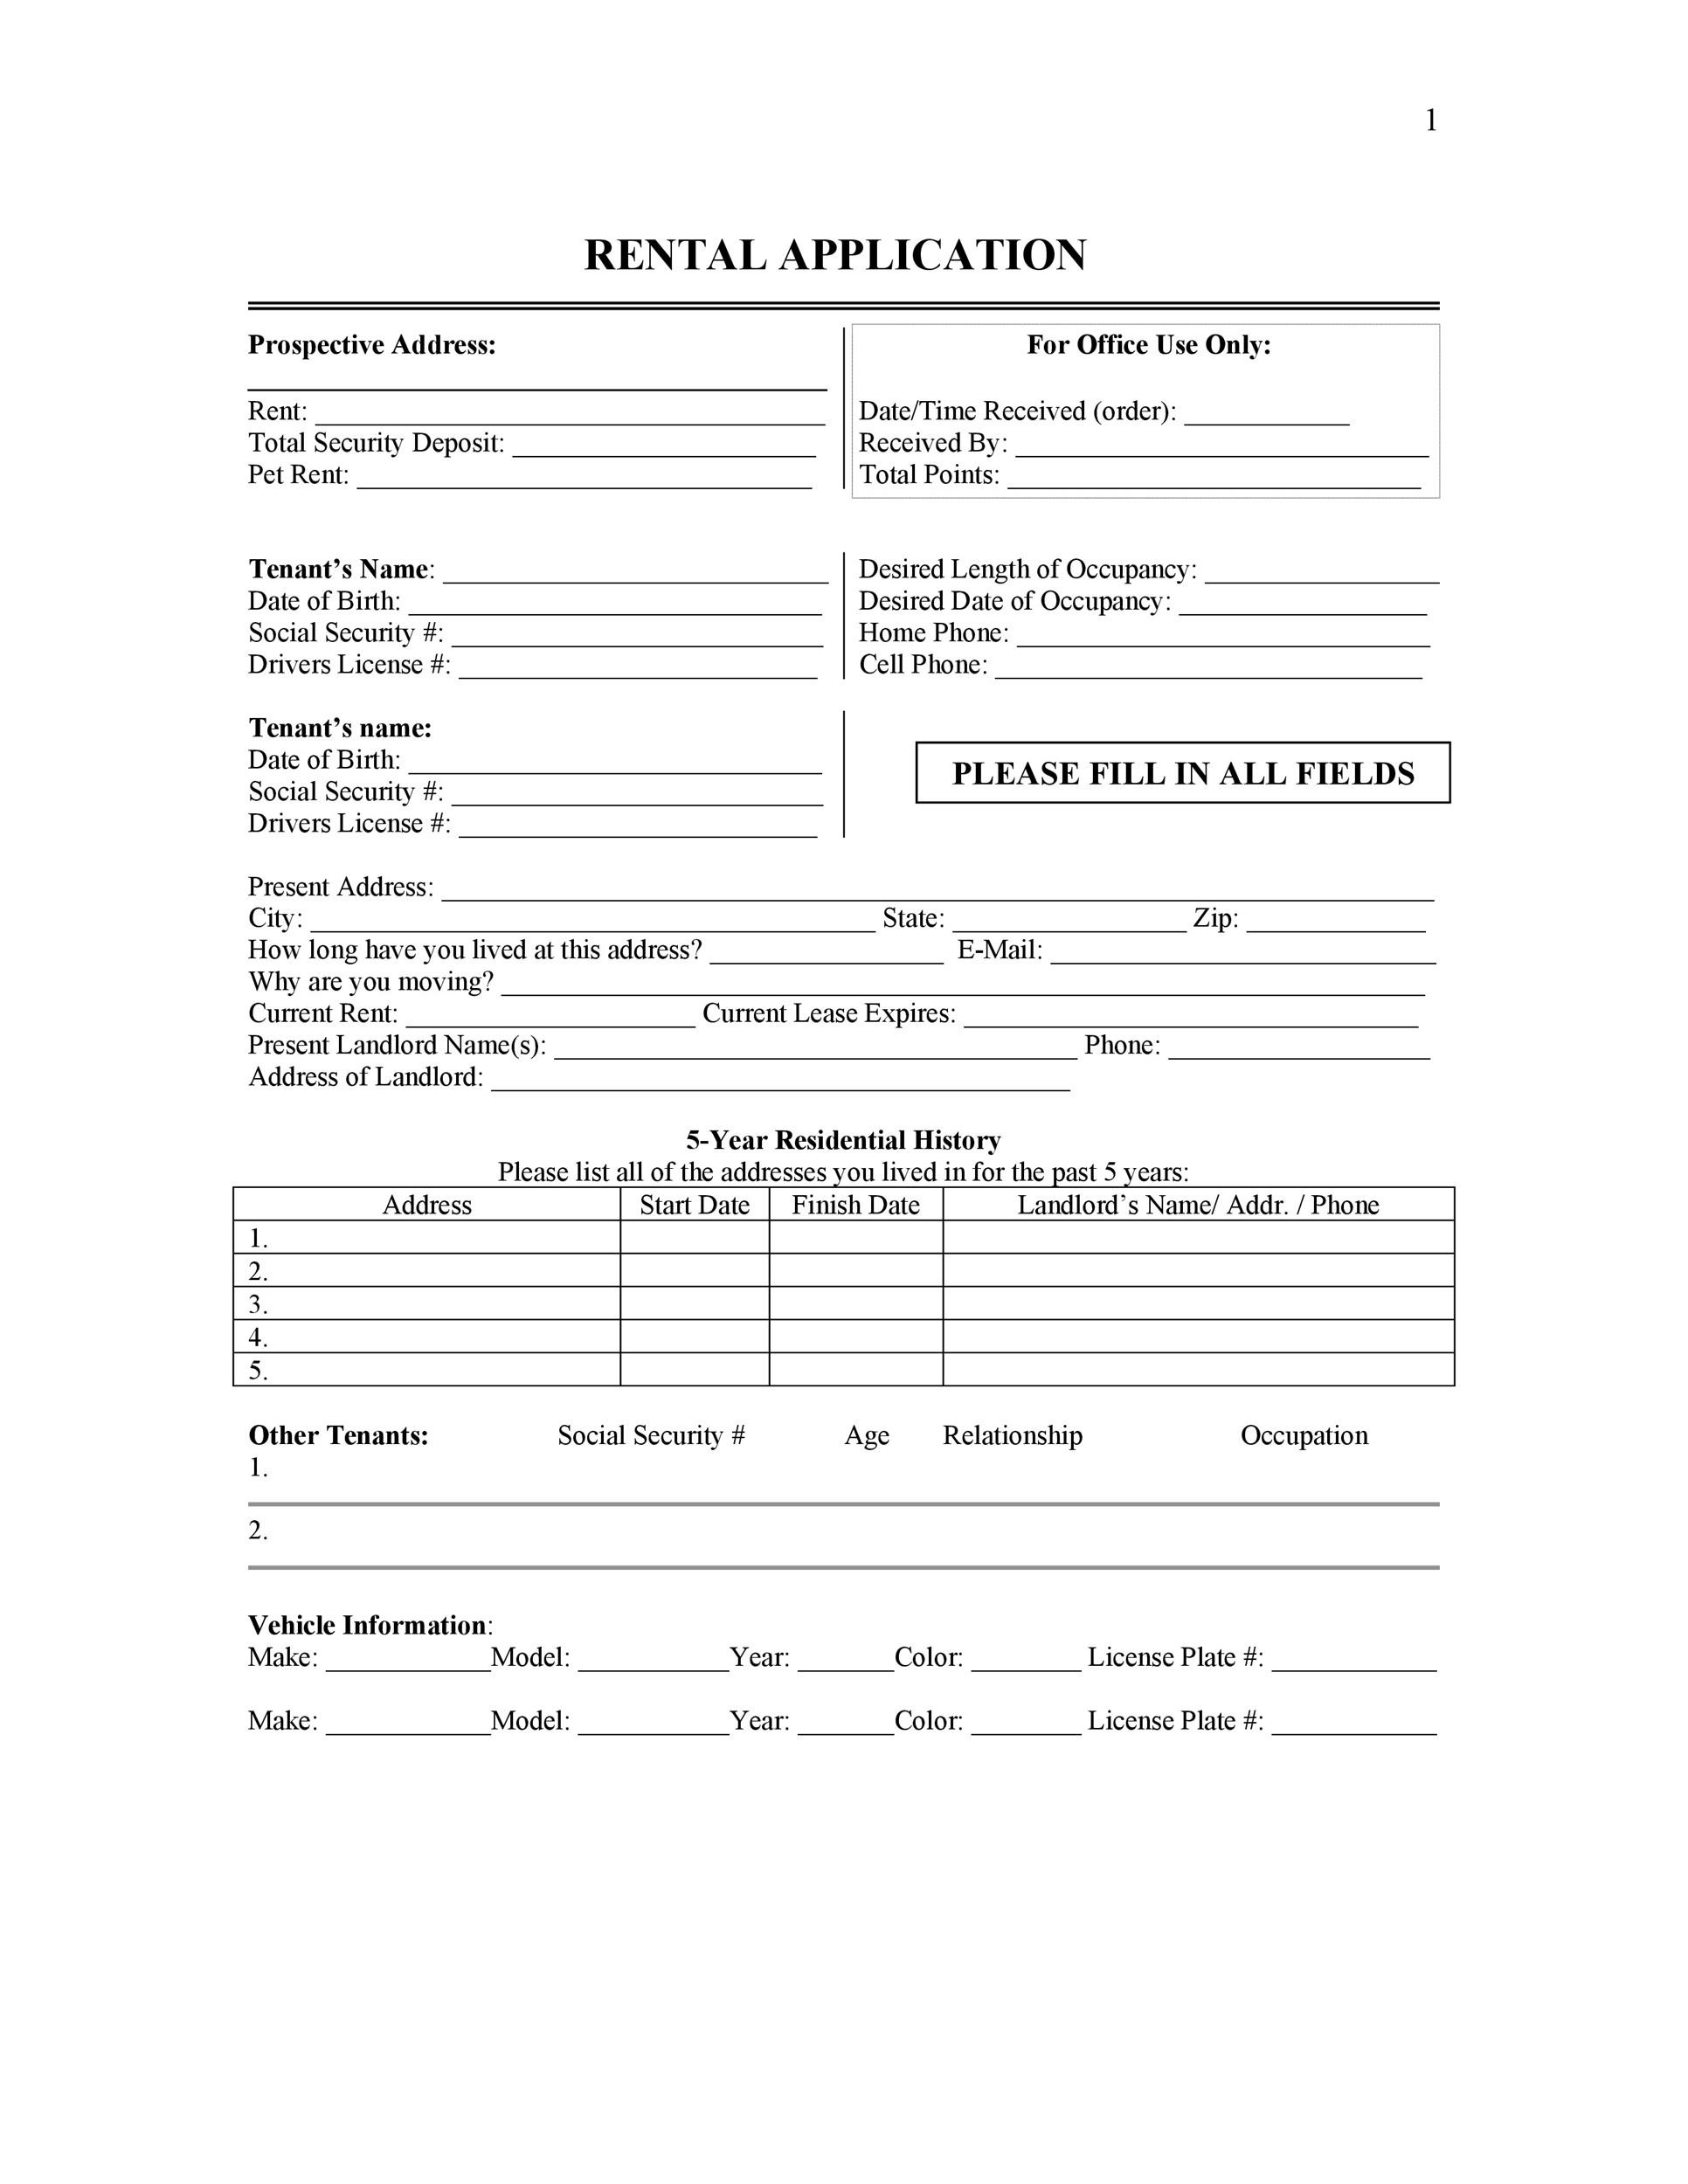 42-simple-rental-application-forms-100-free-templatelab